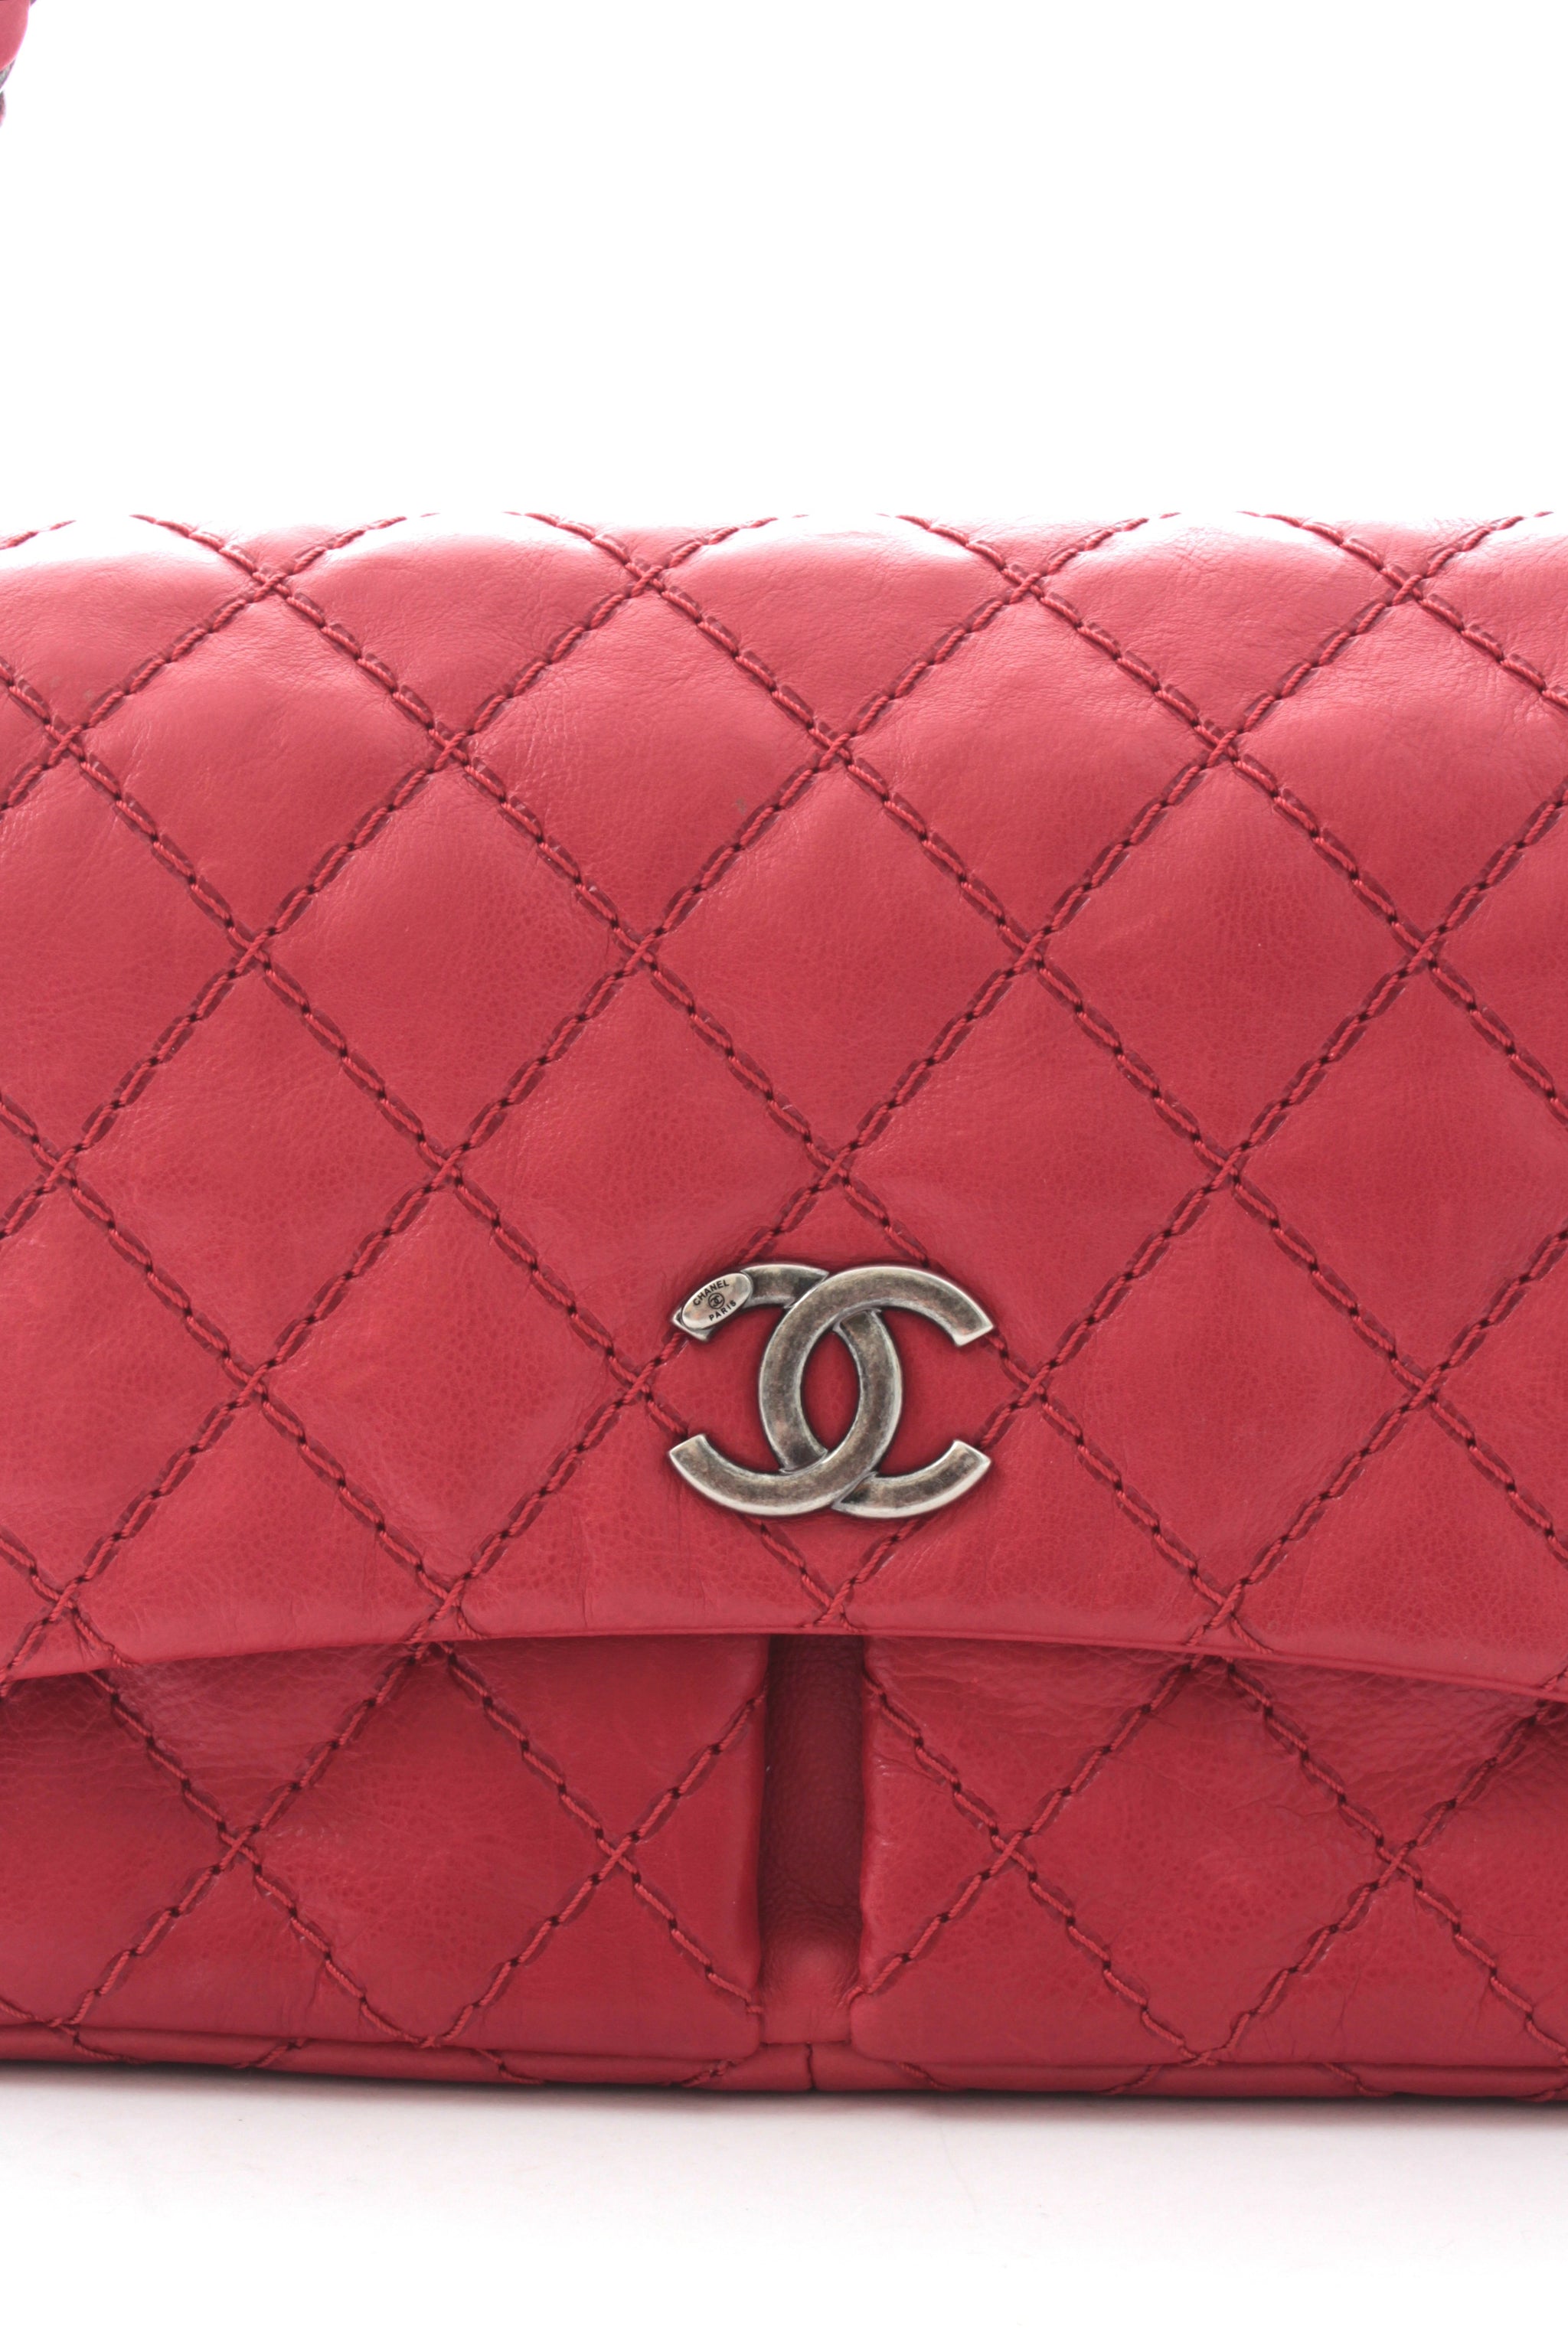 Chanel Limited Edition Large Leather Flap Bag (A67725) - Closet Upgrade